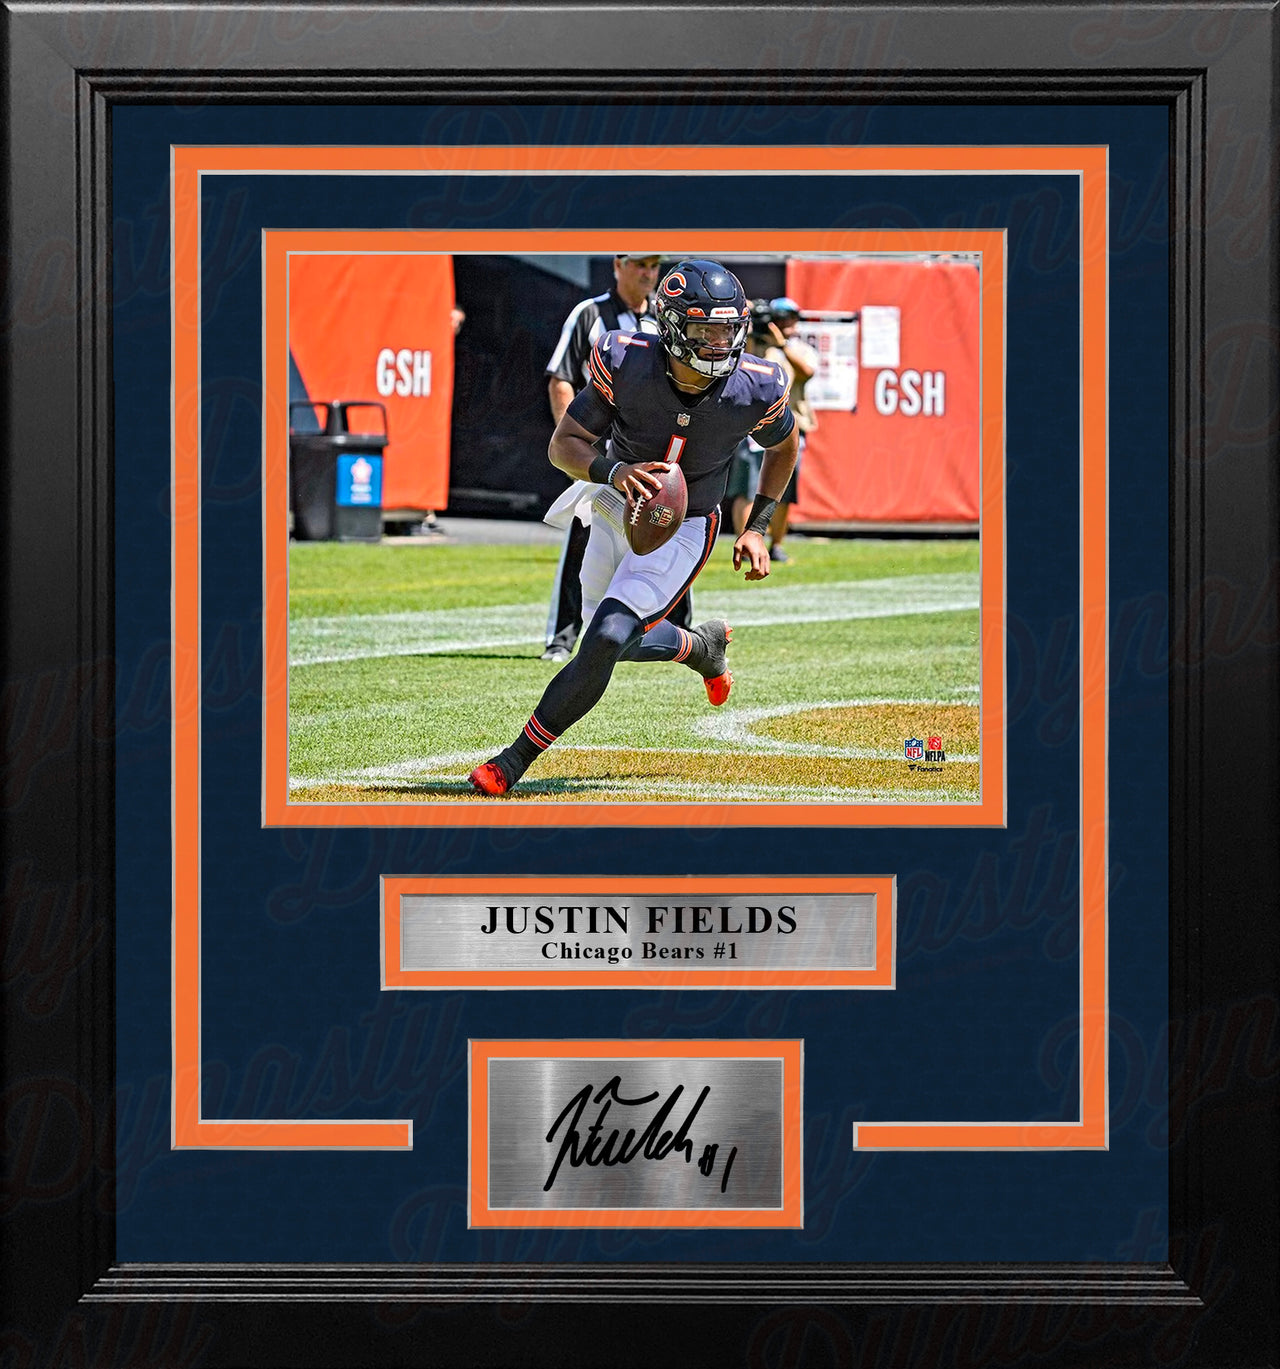 Justin Fields on the Run Chicago Bears 8" x 10" Framed Football Photo with Engraved Autograph